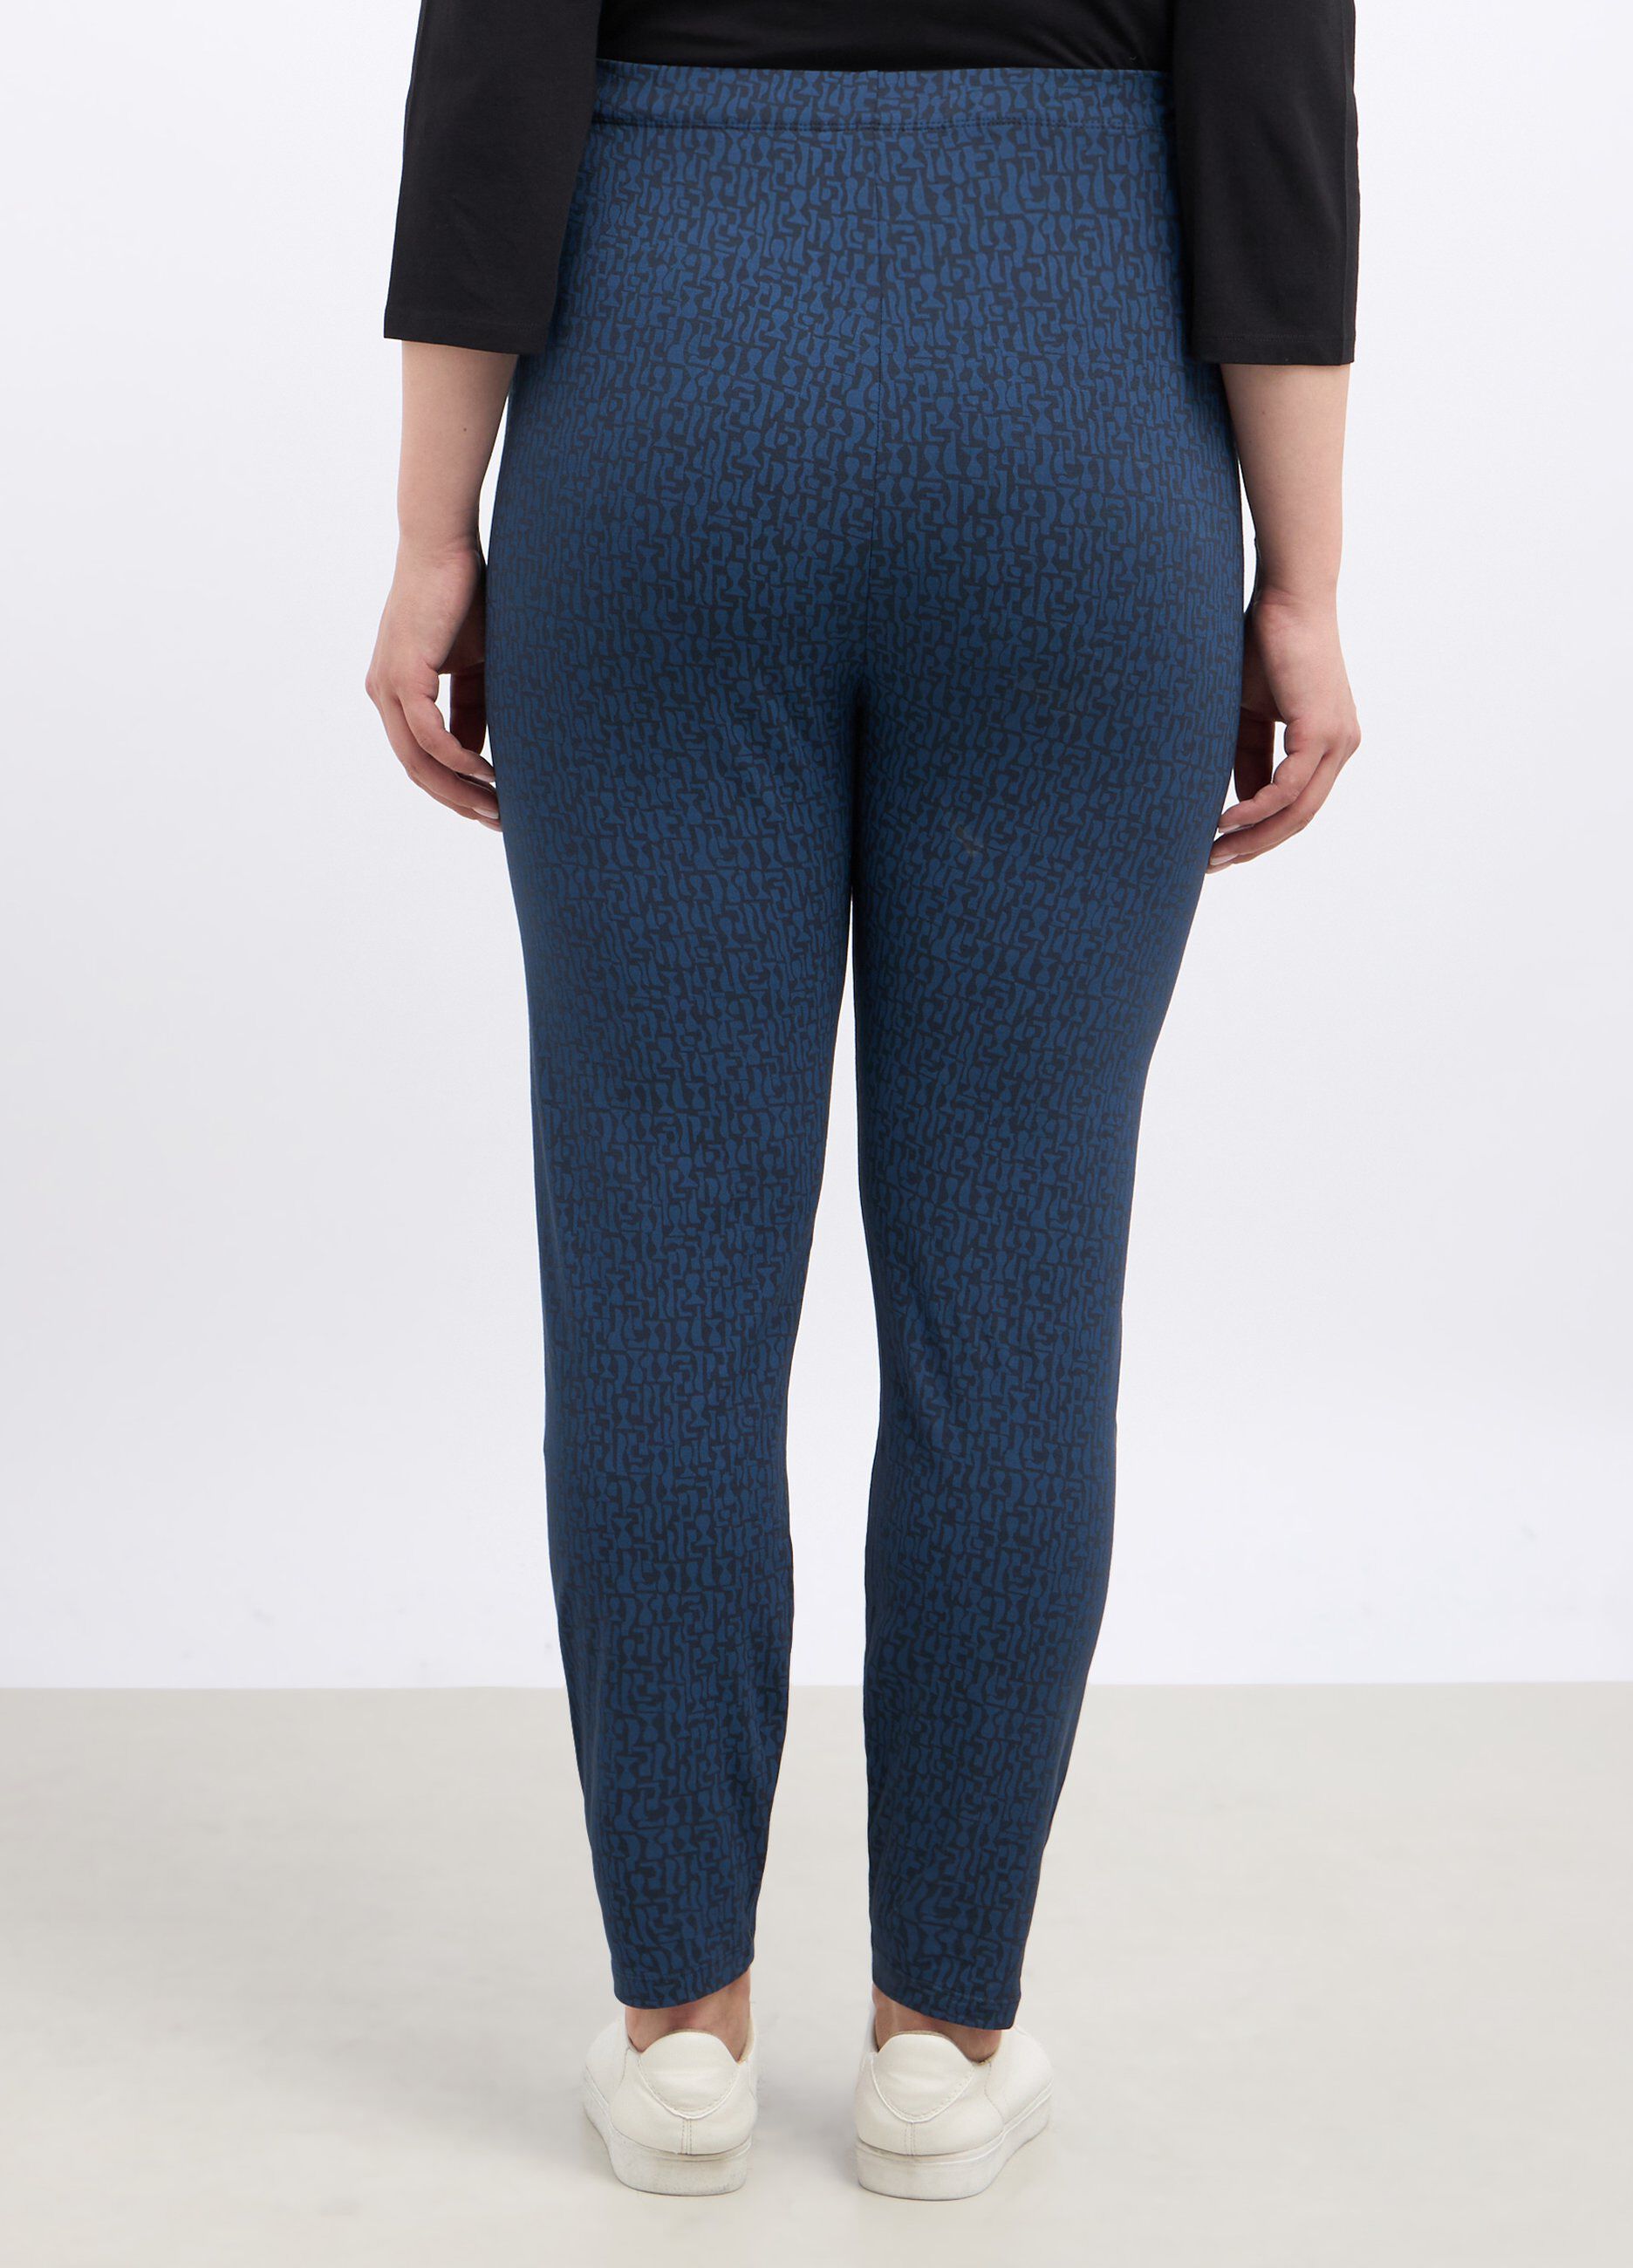 Leggings fitness in cotone stretch donna curvy_1